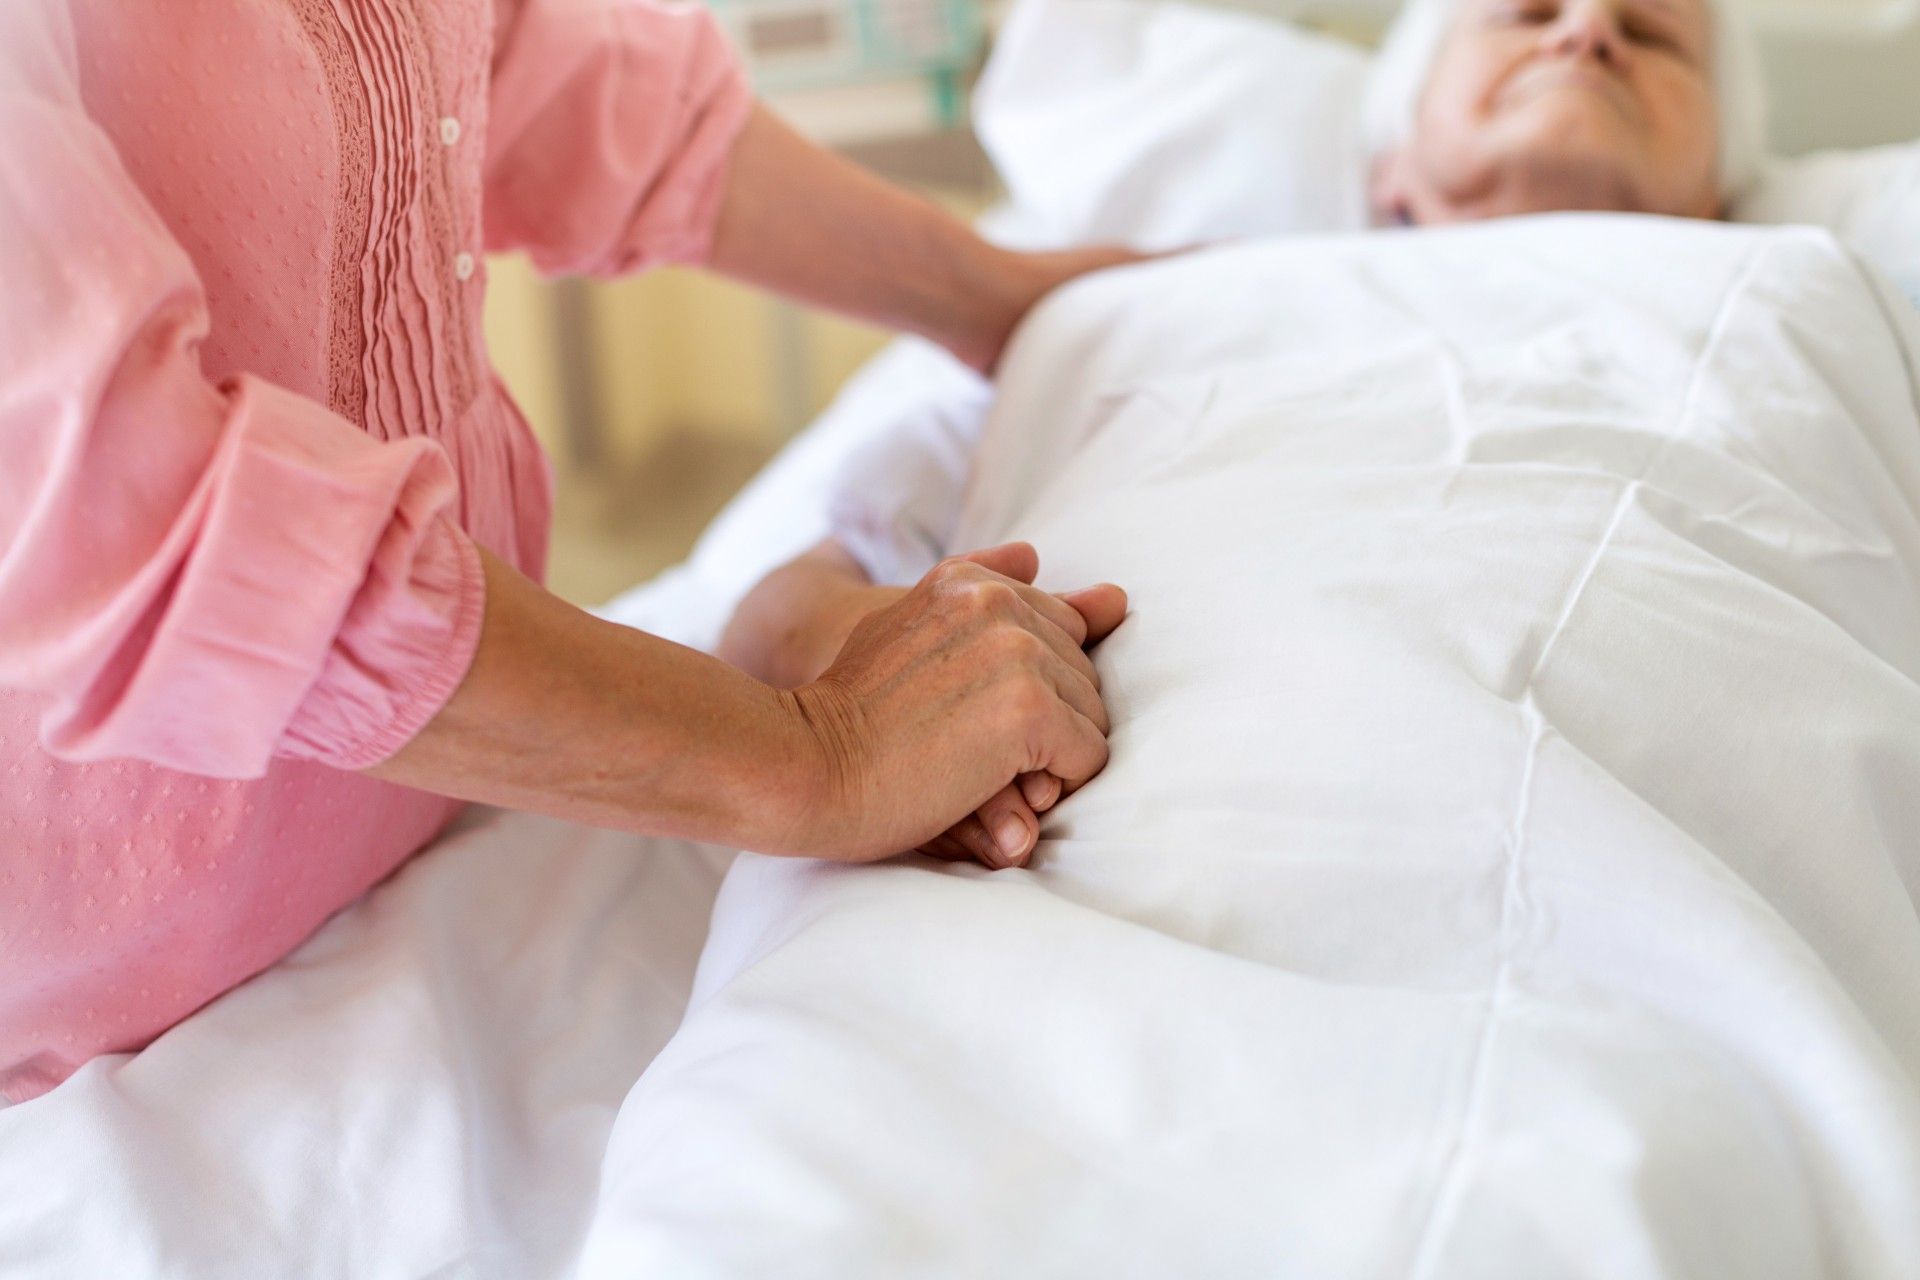 A woman holds the hand of a patient lying in a nursing home bed - nursing home deaths